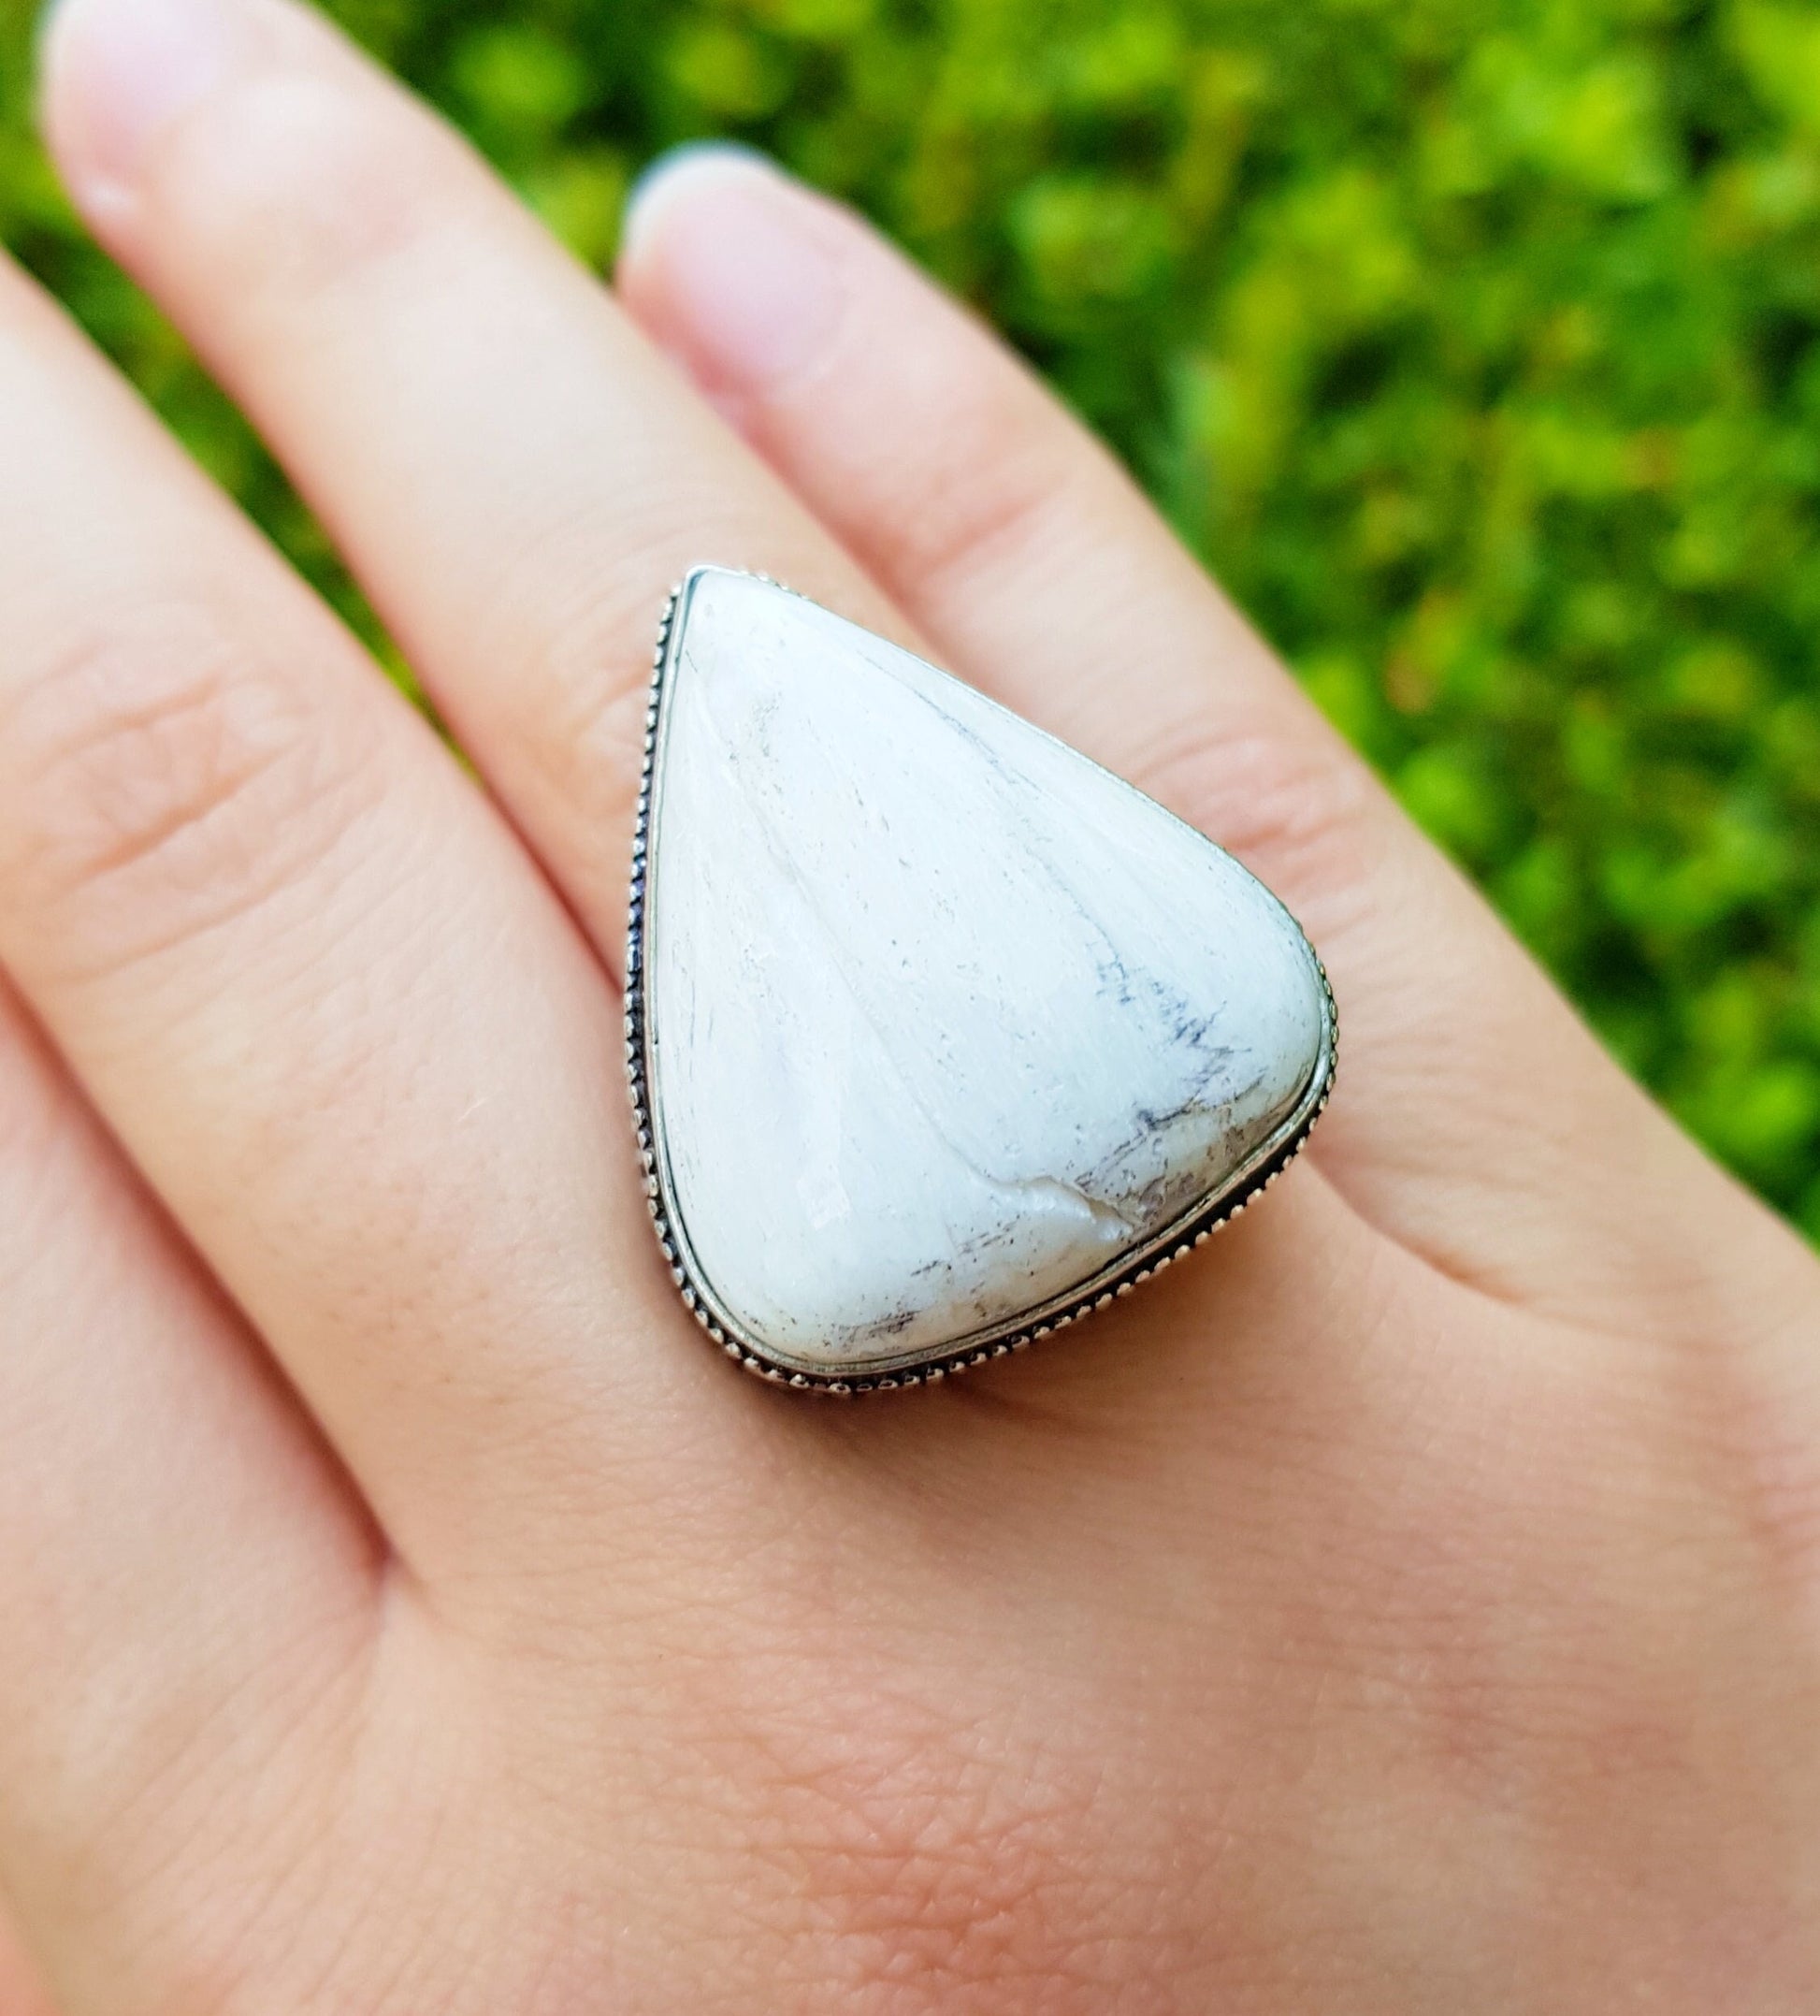 White Agate Ring In Sterling Silver SizeUS 6 1/2 Statement Ring Unique Gift Teardrop Ring GypsyJewelry